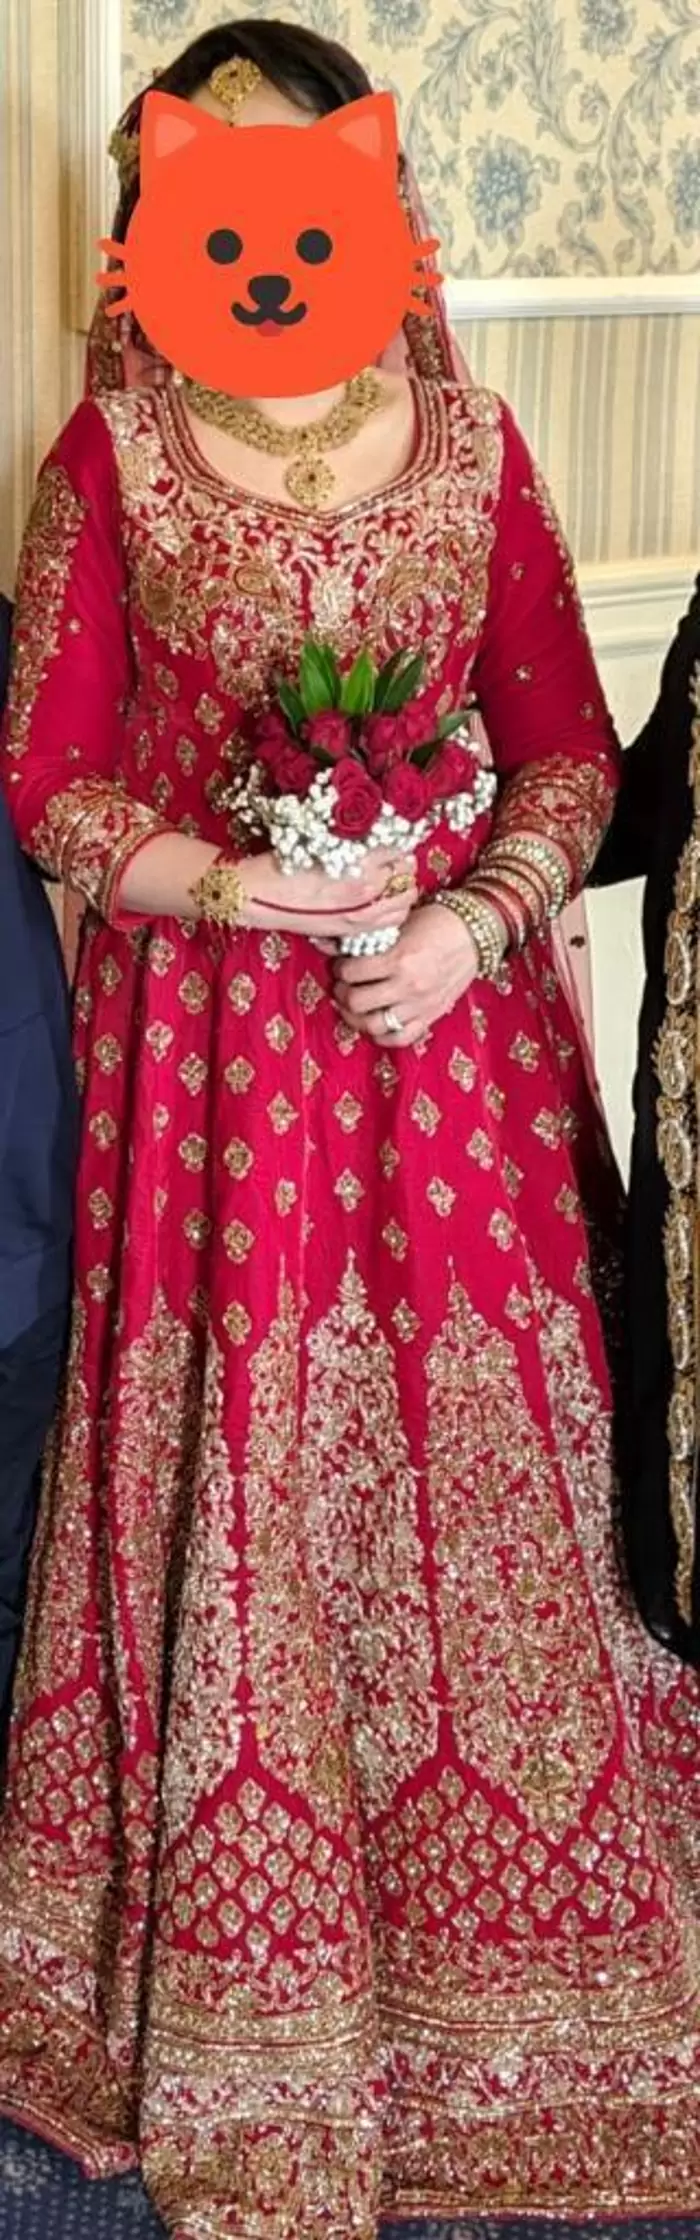 £1,000.00 Asian wedding dress for sell